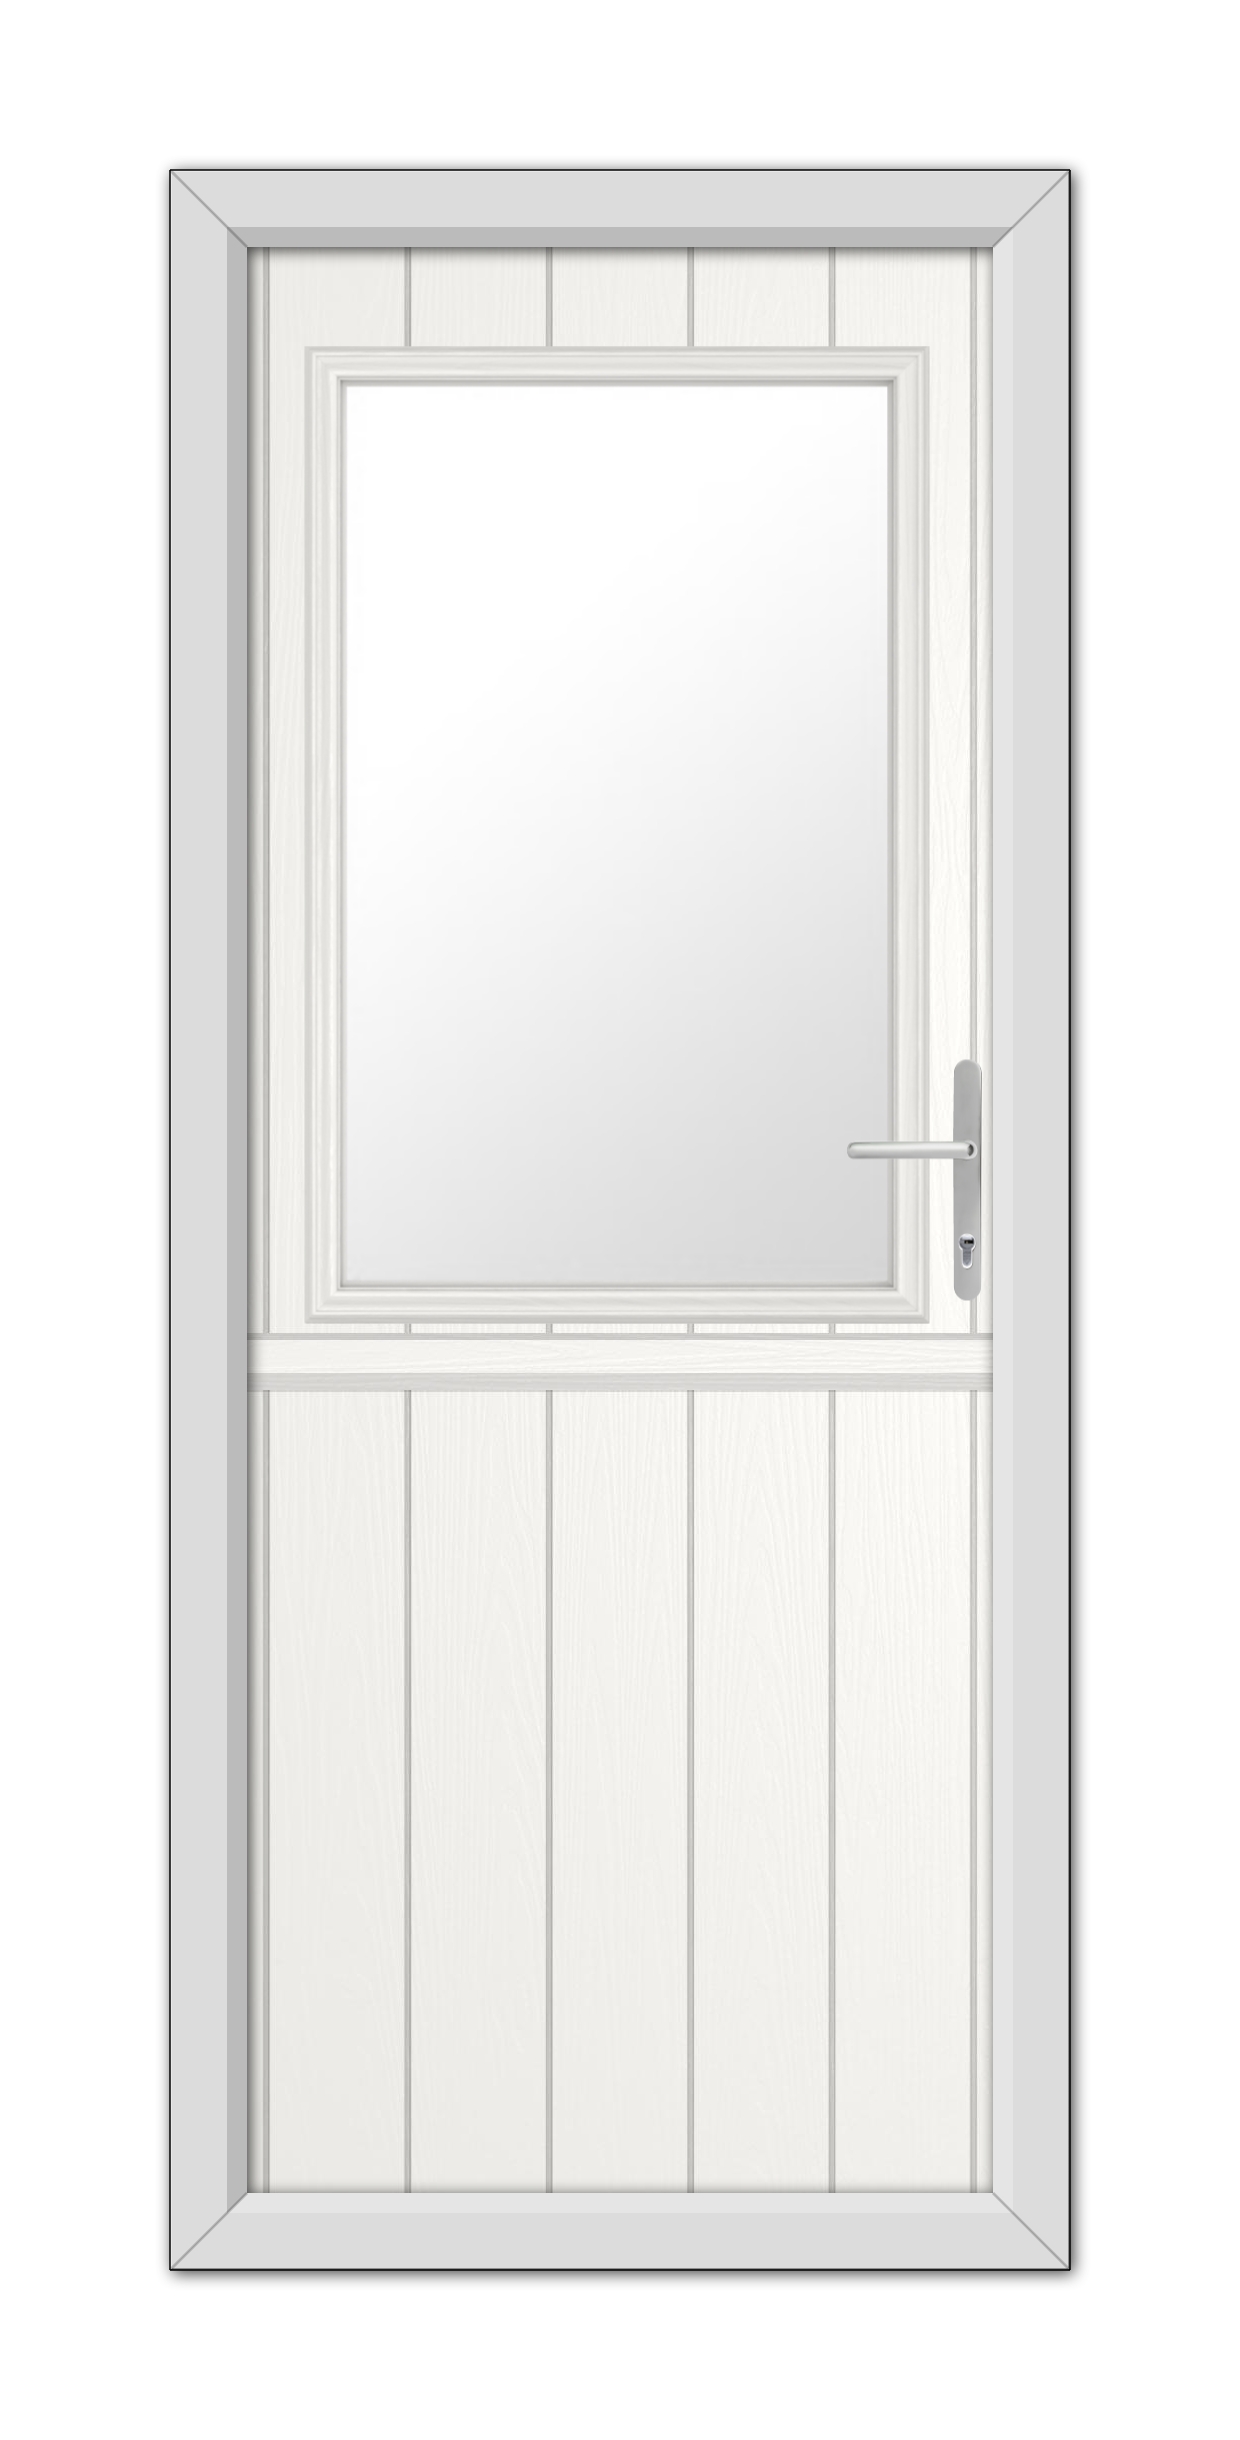 A White Clifton Stable Composite Door 48mm Timber Core with a closed panel, reflective glass, and a locking handle on the right side.